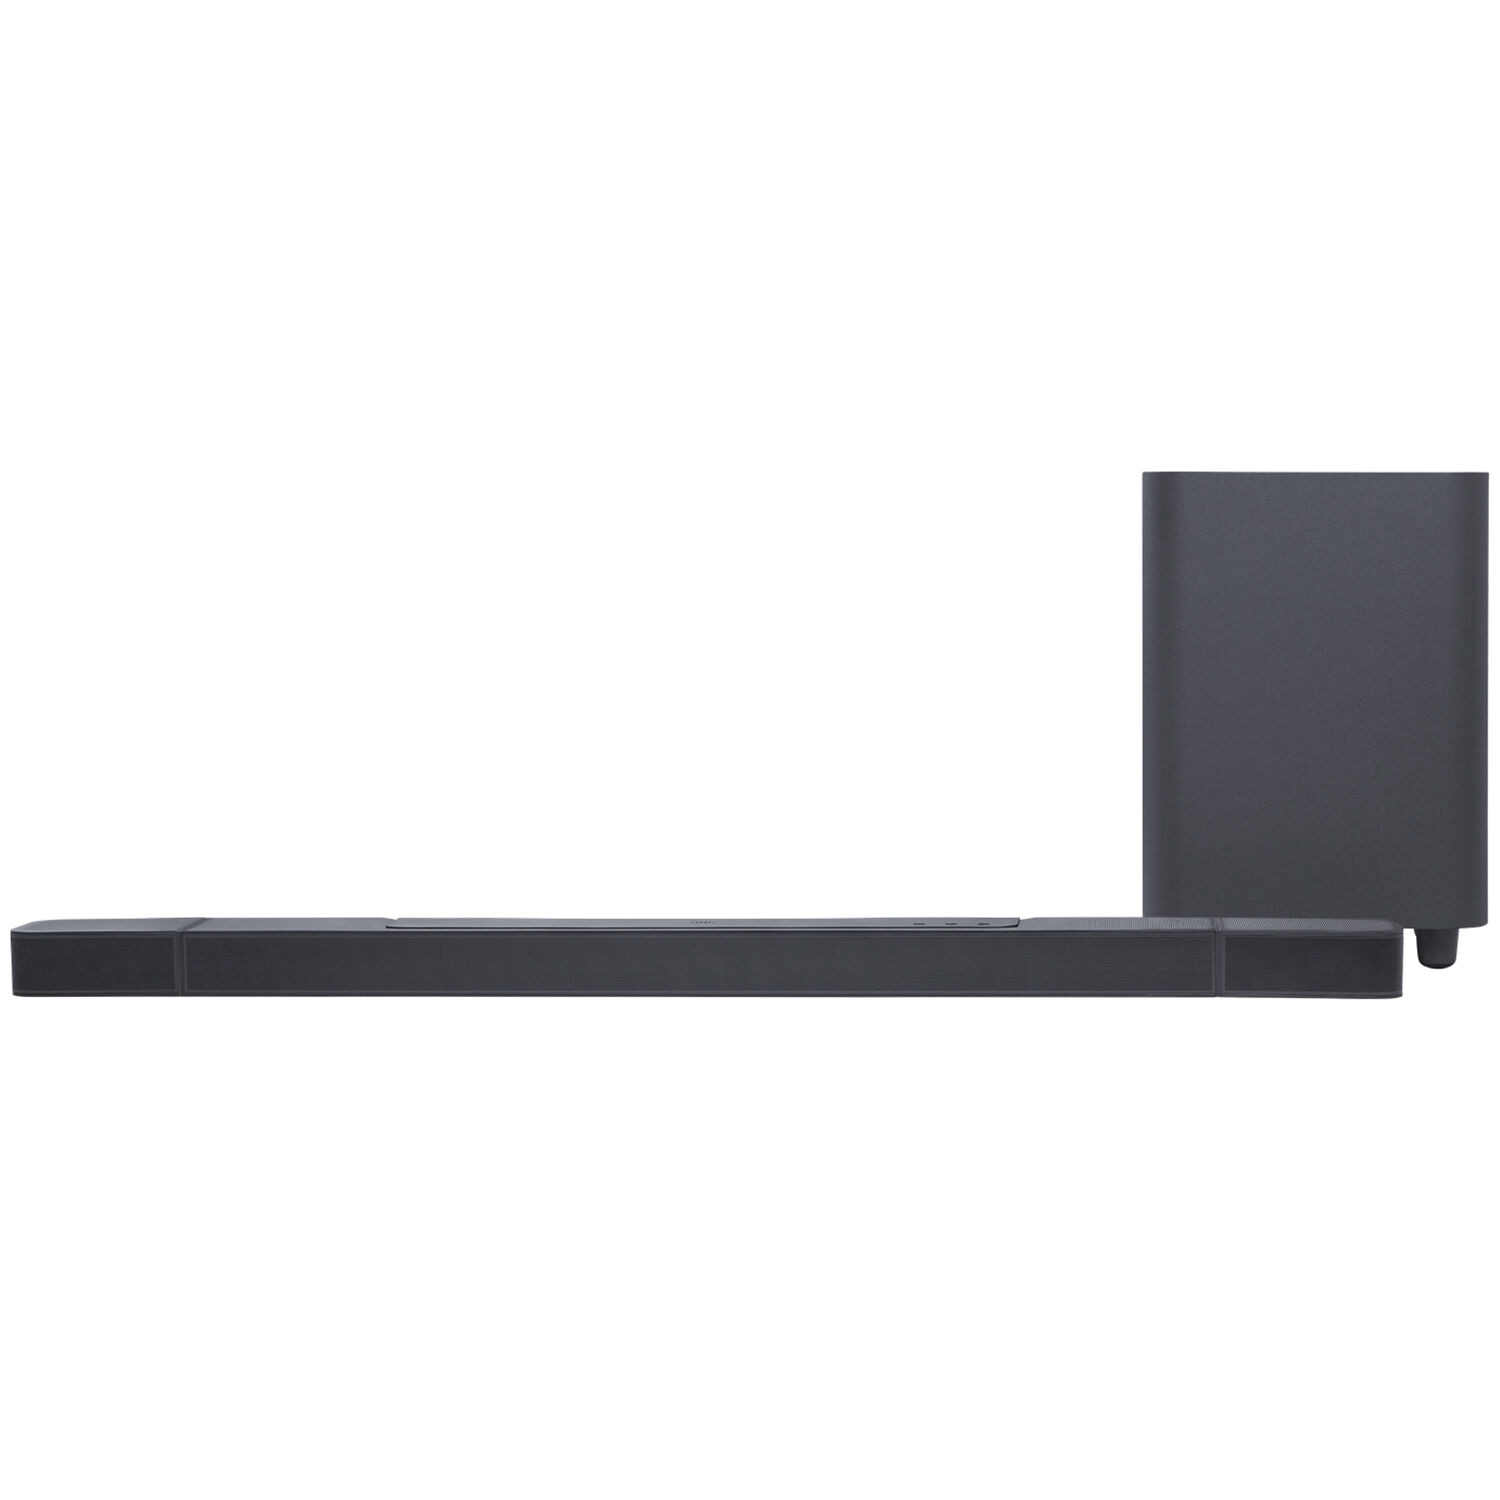 JBL - BAR 1000 7.1.4ch Dolby Atmos Soundbar with Wireless Subwoofer and  Detachable Rear Speakers - Black